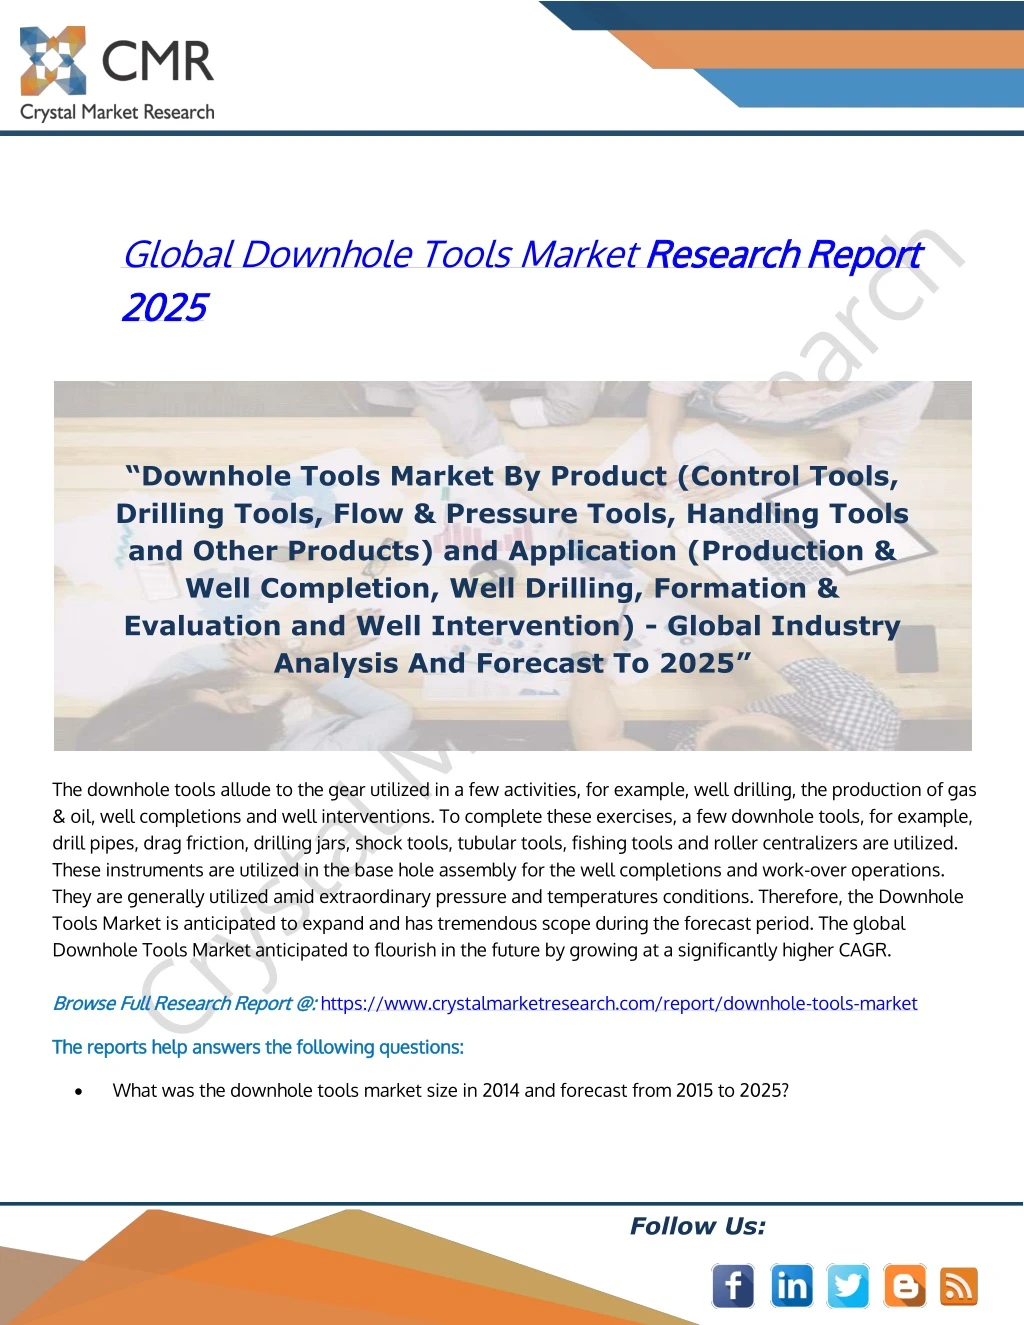 global downhole tools market research 2025 2025